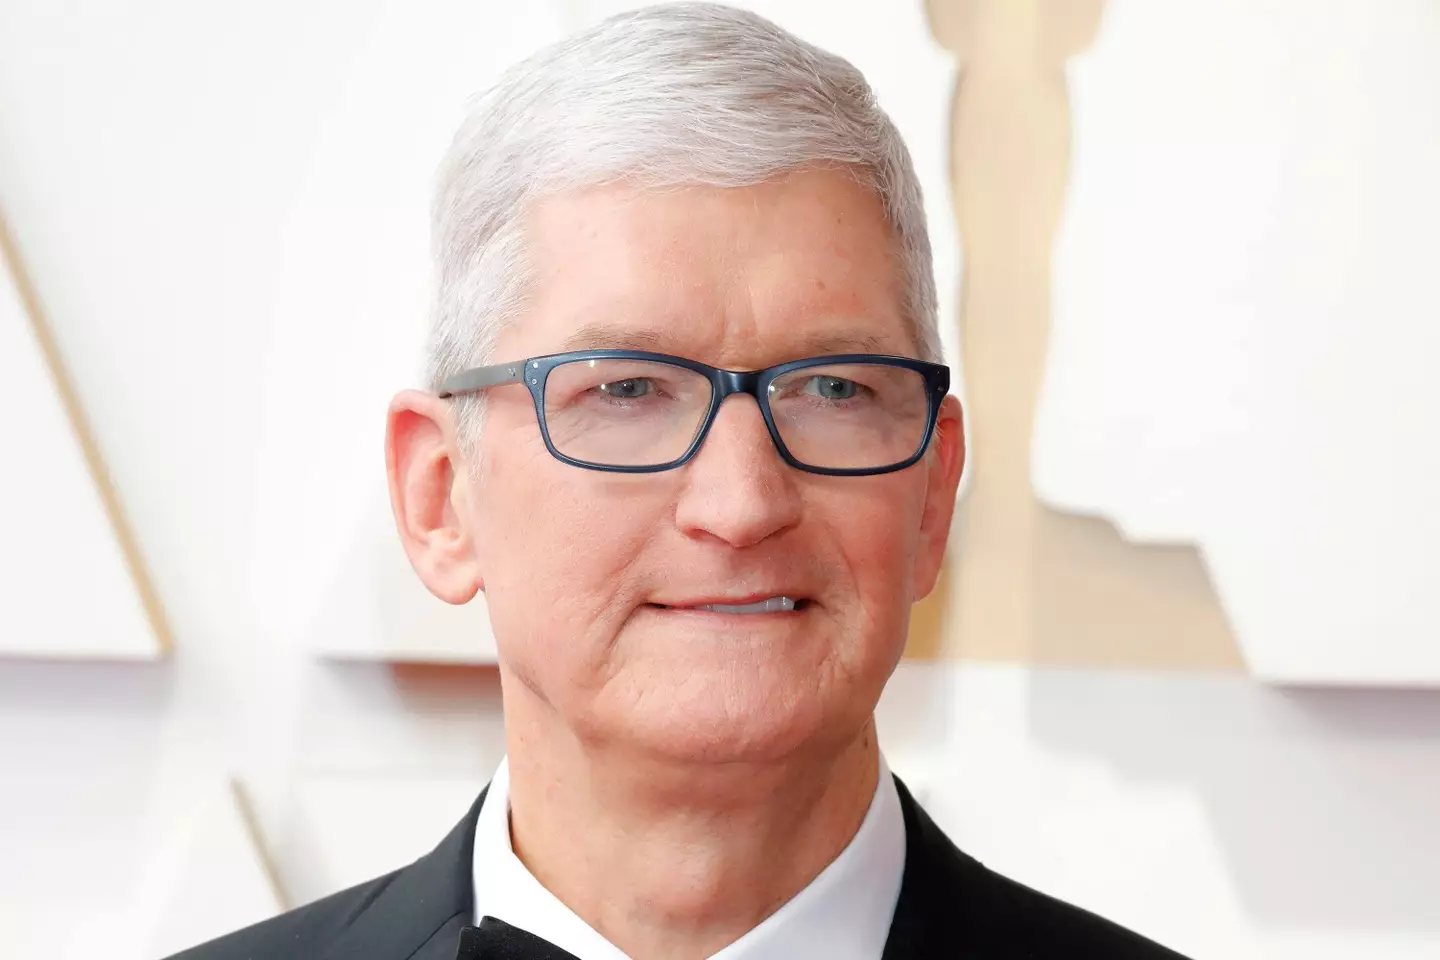 Tim Cook outlined what he thinks the issue is.